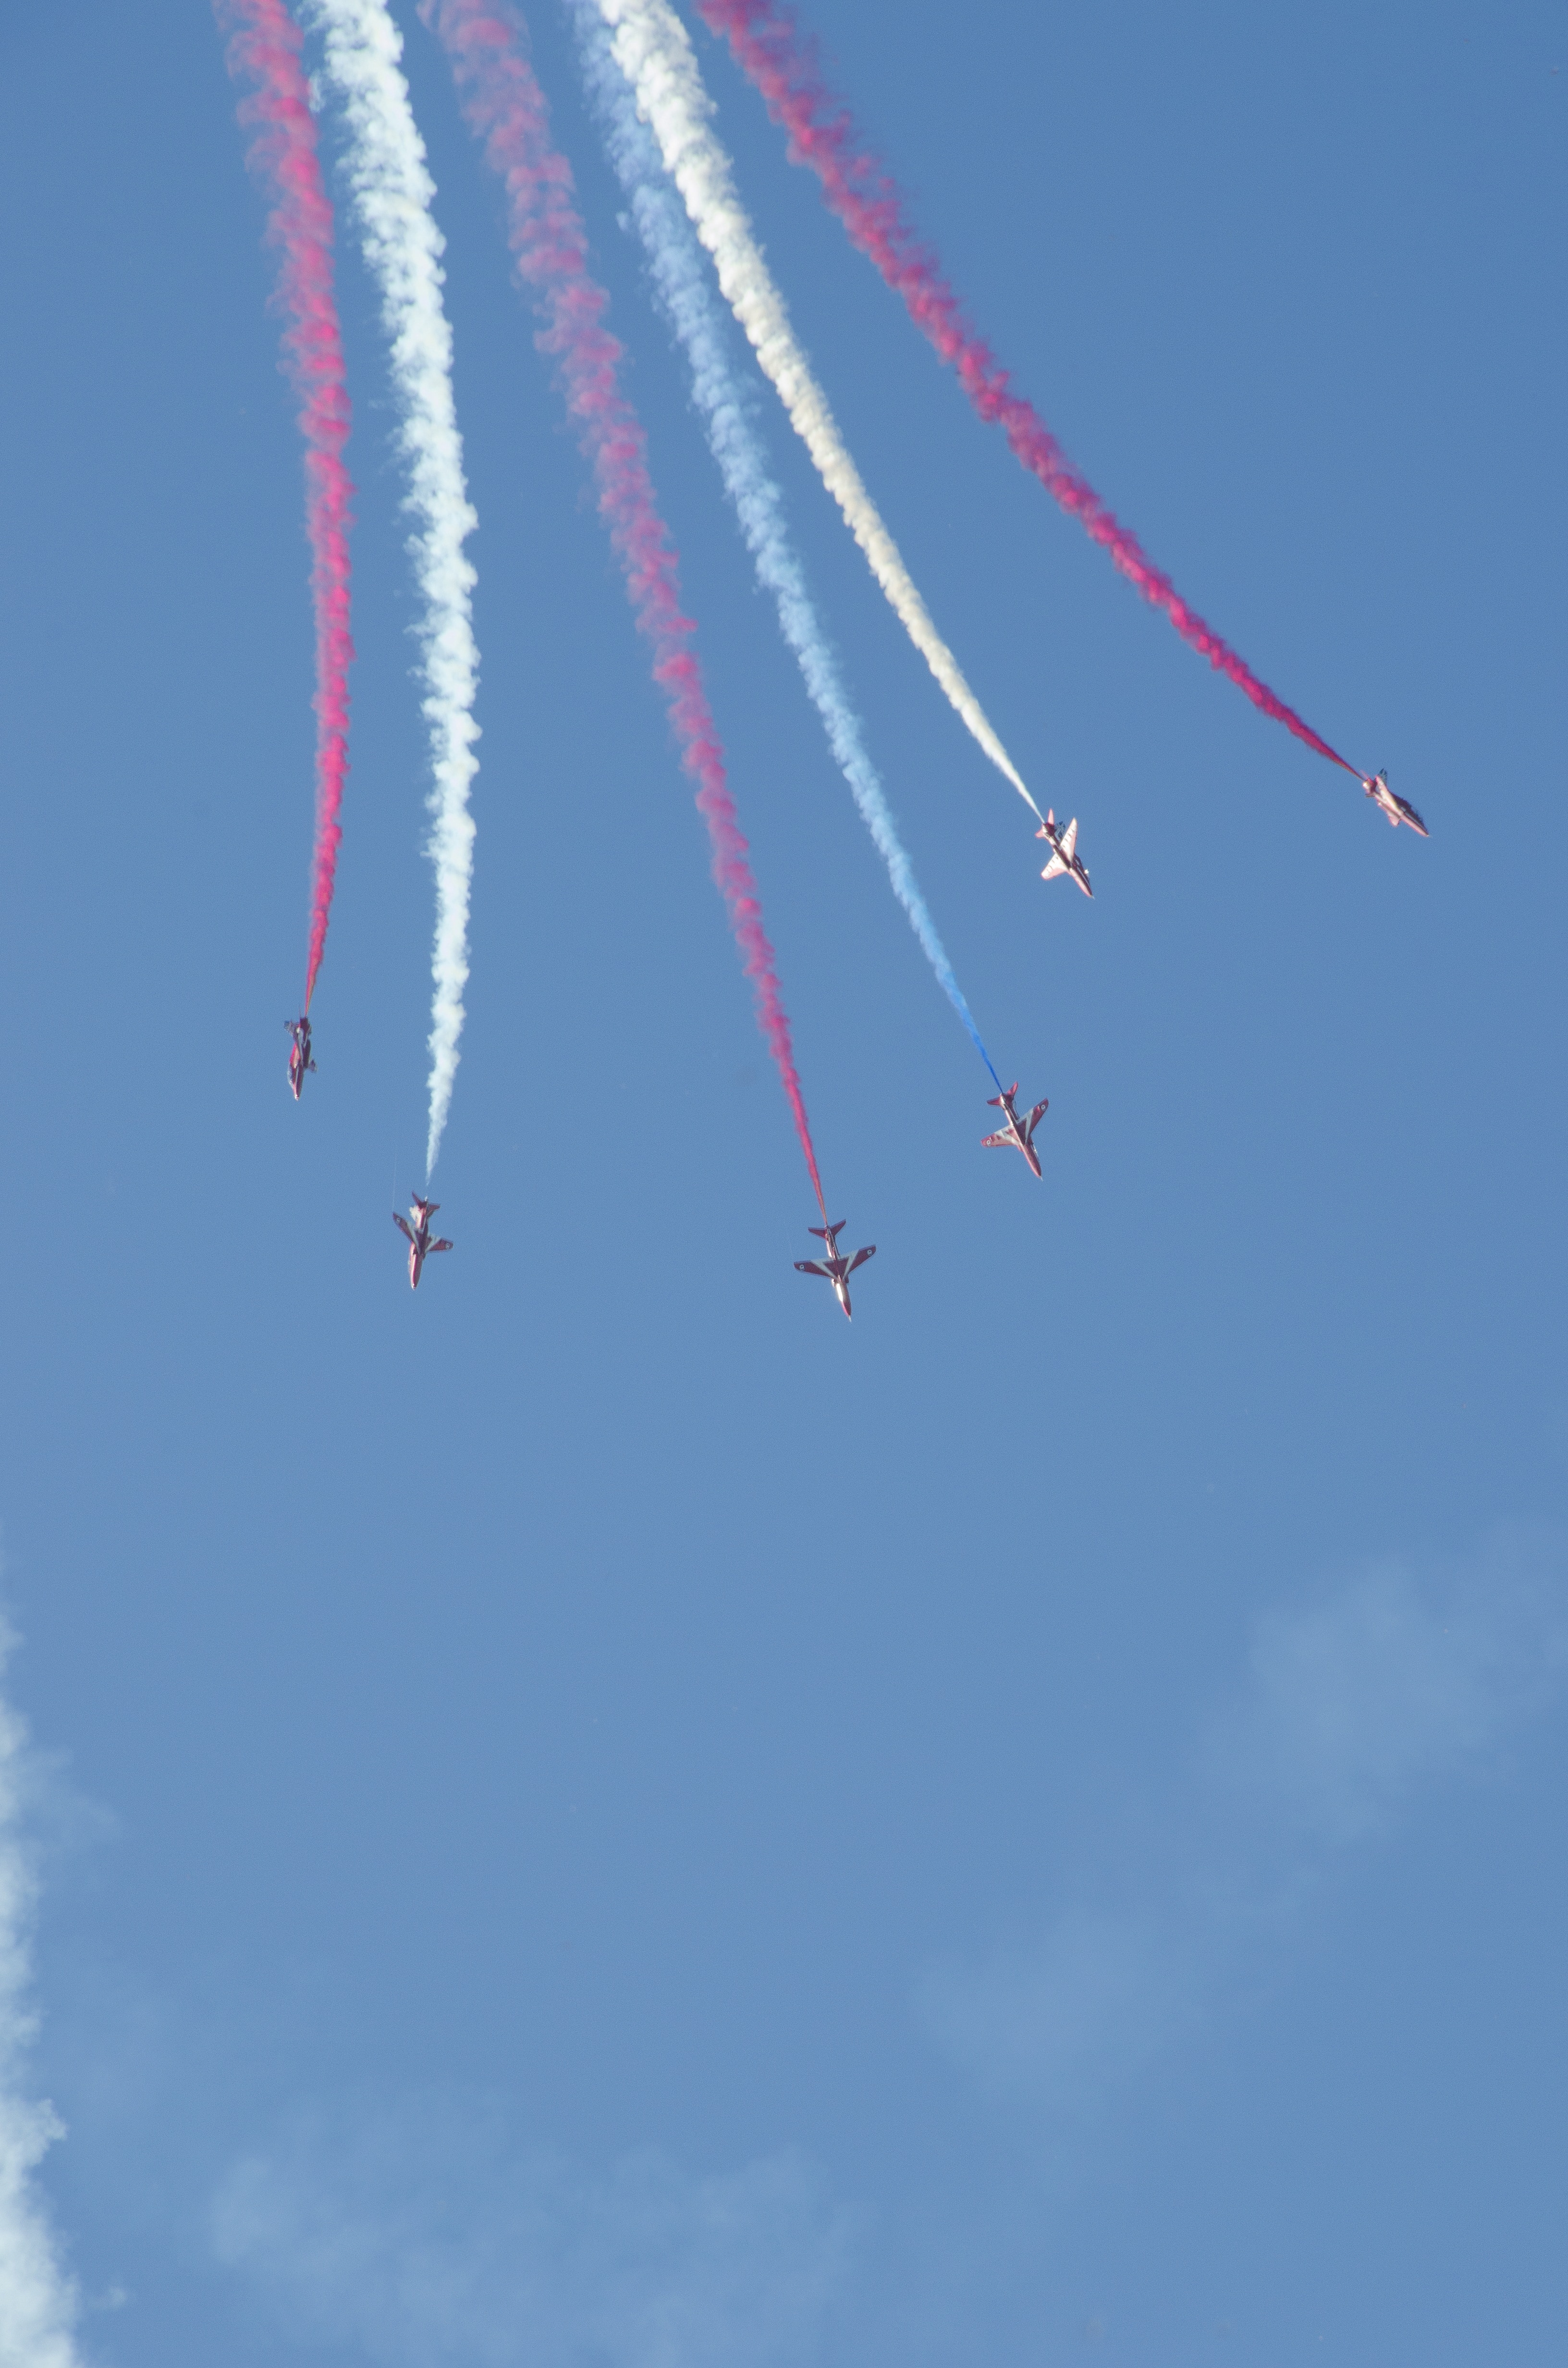 Red Arrows, Airshow, Airplane, Jet, airshow, vapor trail